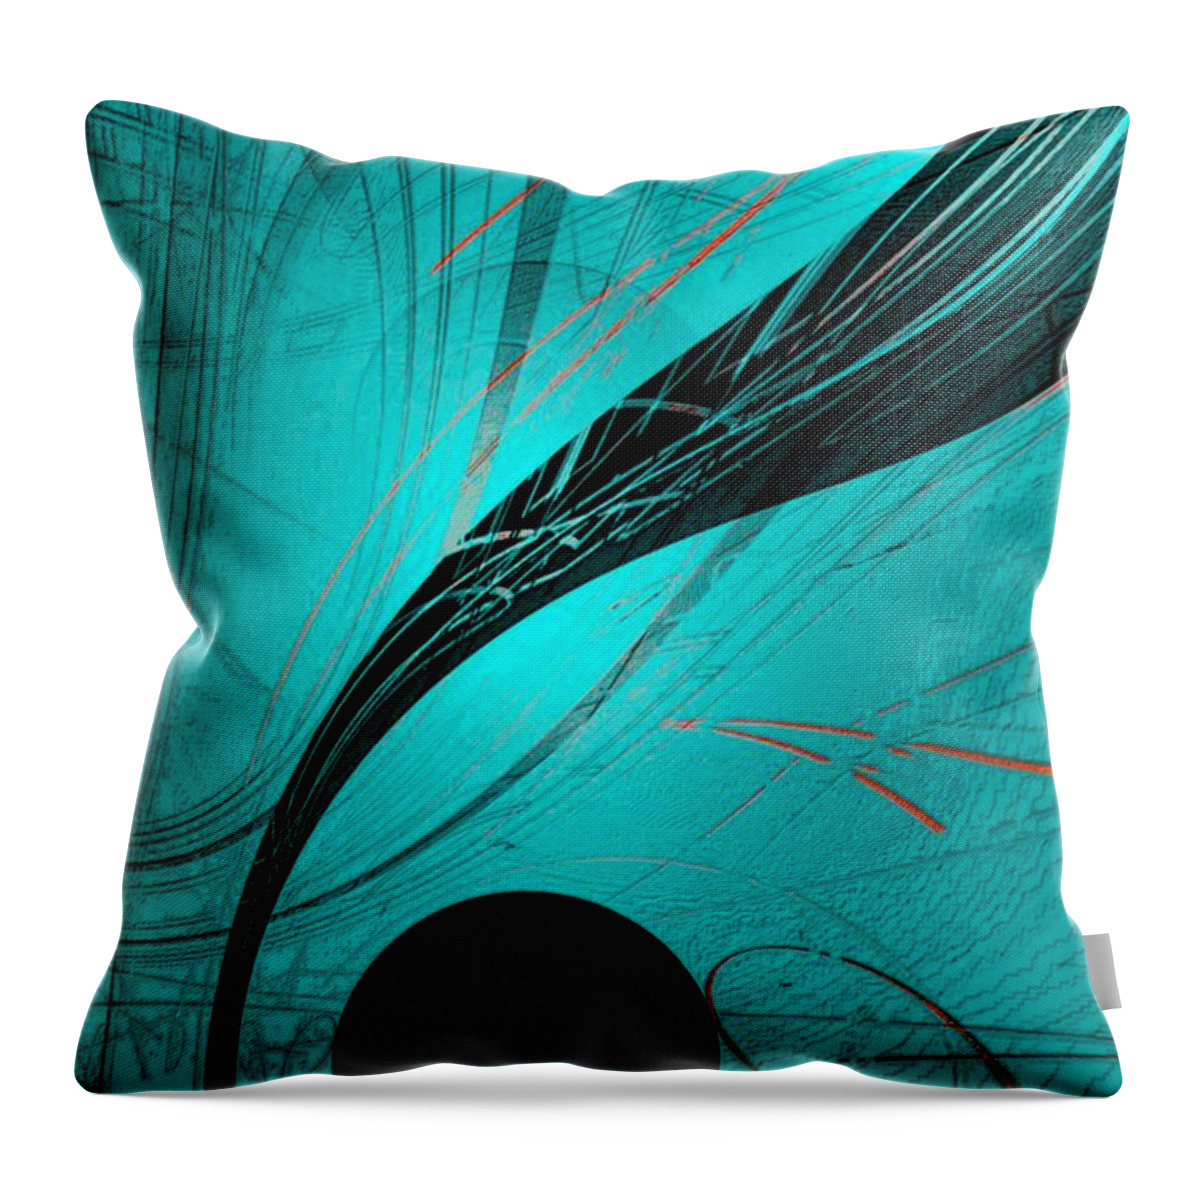 Abstract Throw Pillow featuring the digital art Abstract170-2014 by John Krakora